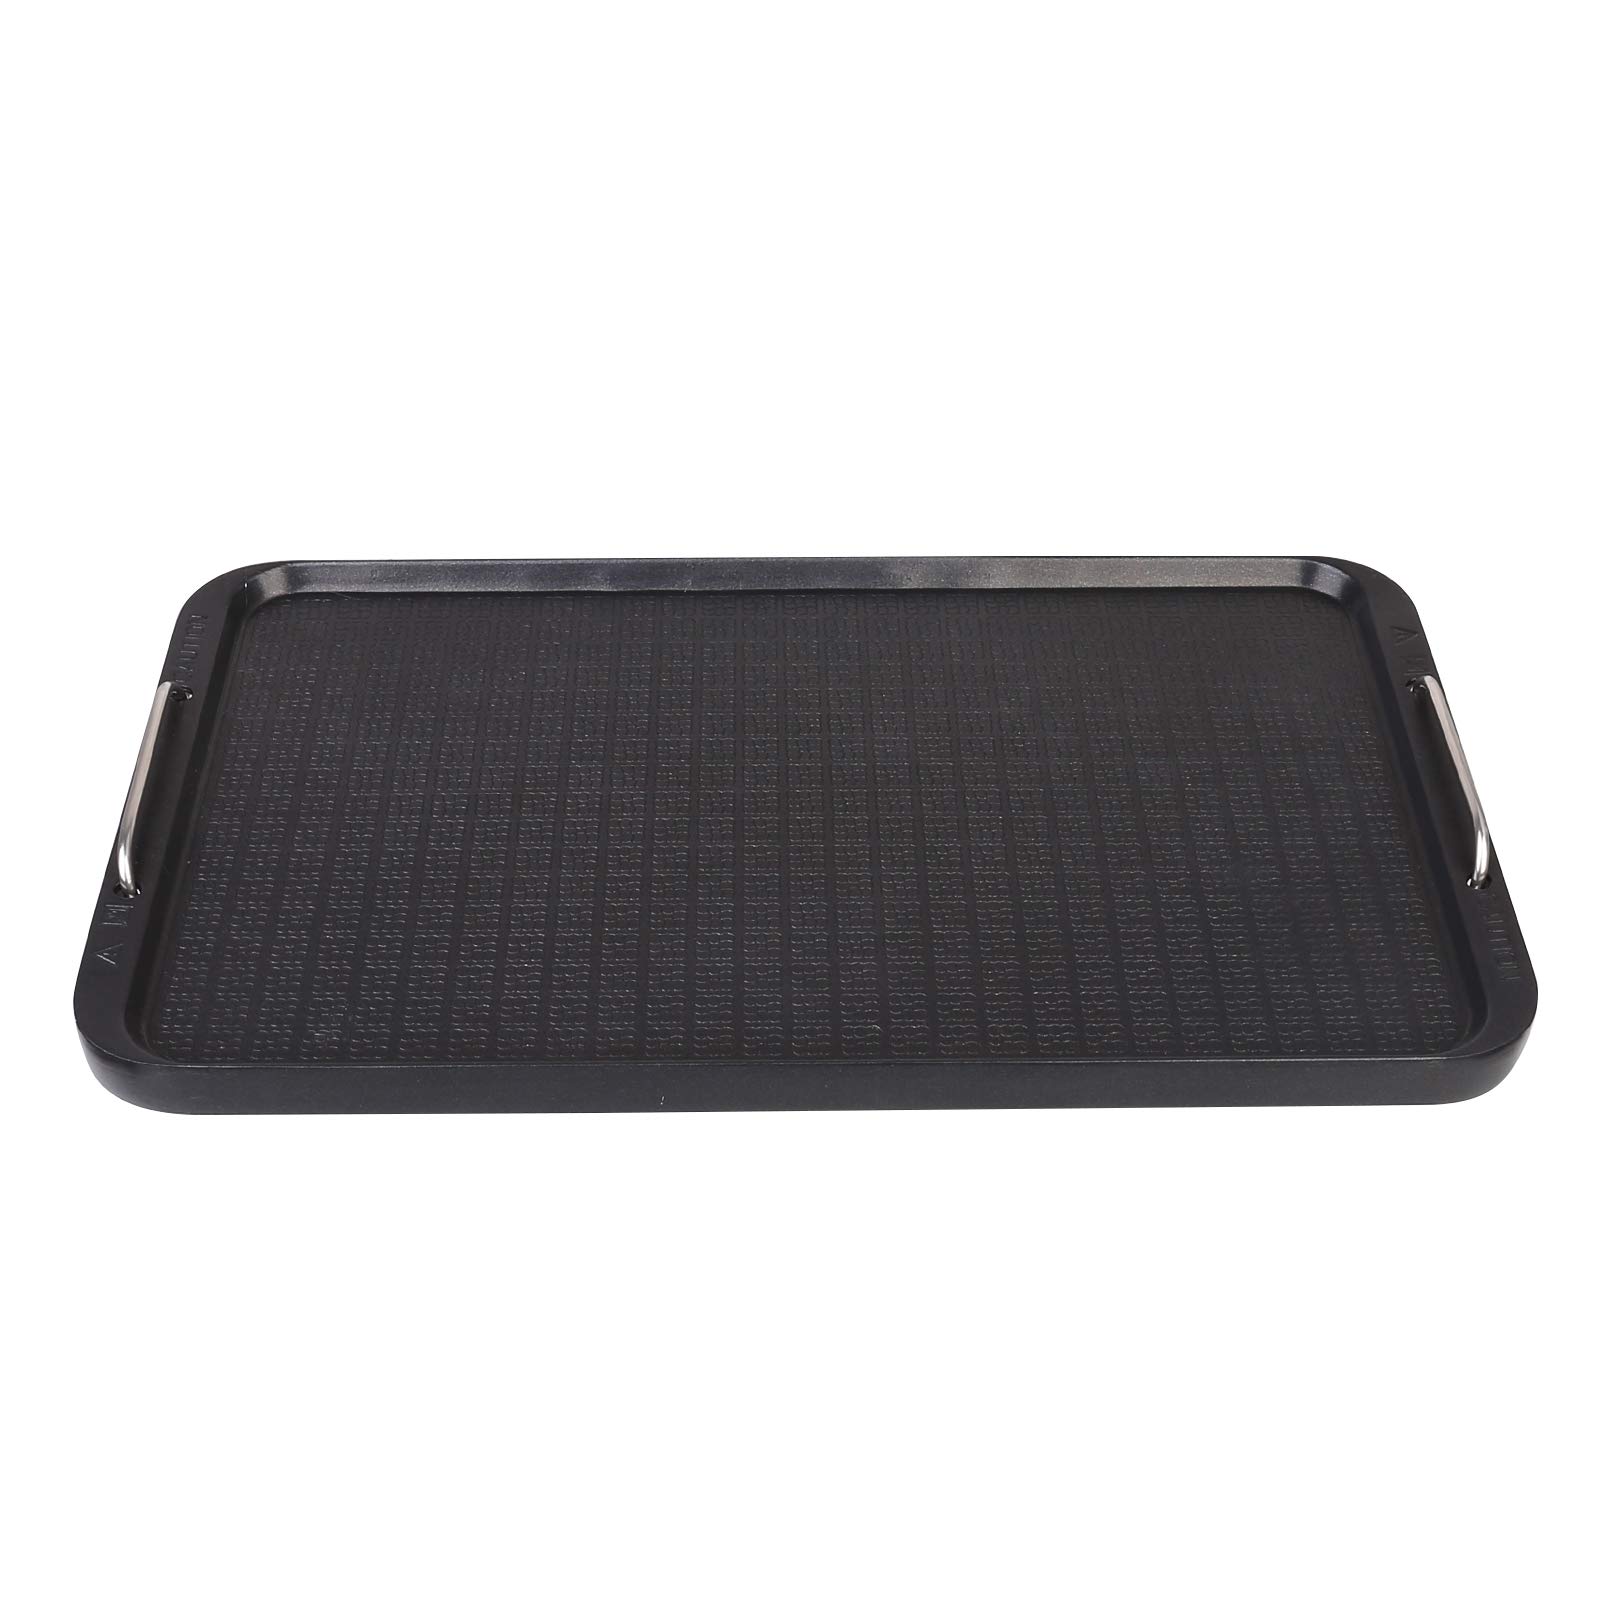 Flat Top Griddle for Stovetop, Non-Stick Griddle Grill Pan, Stove Top Grill,14.96" x 8.66", Works with Power XL,Chefman, Carl Schmidt Sohn, Cusimax, Techwood Smokeless Grill,Aluminum,Dishwasher Safe